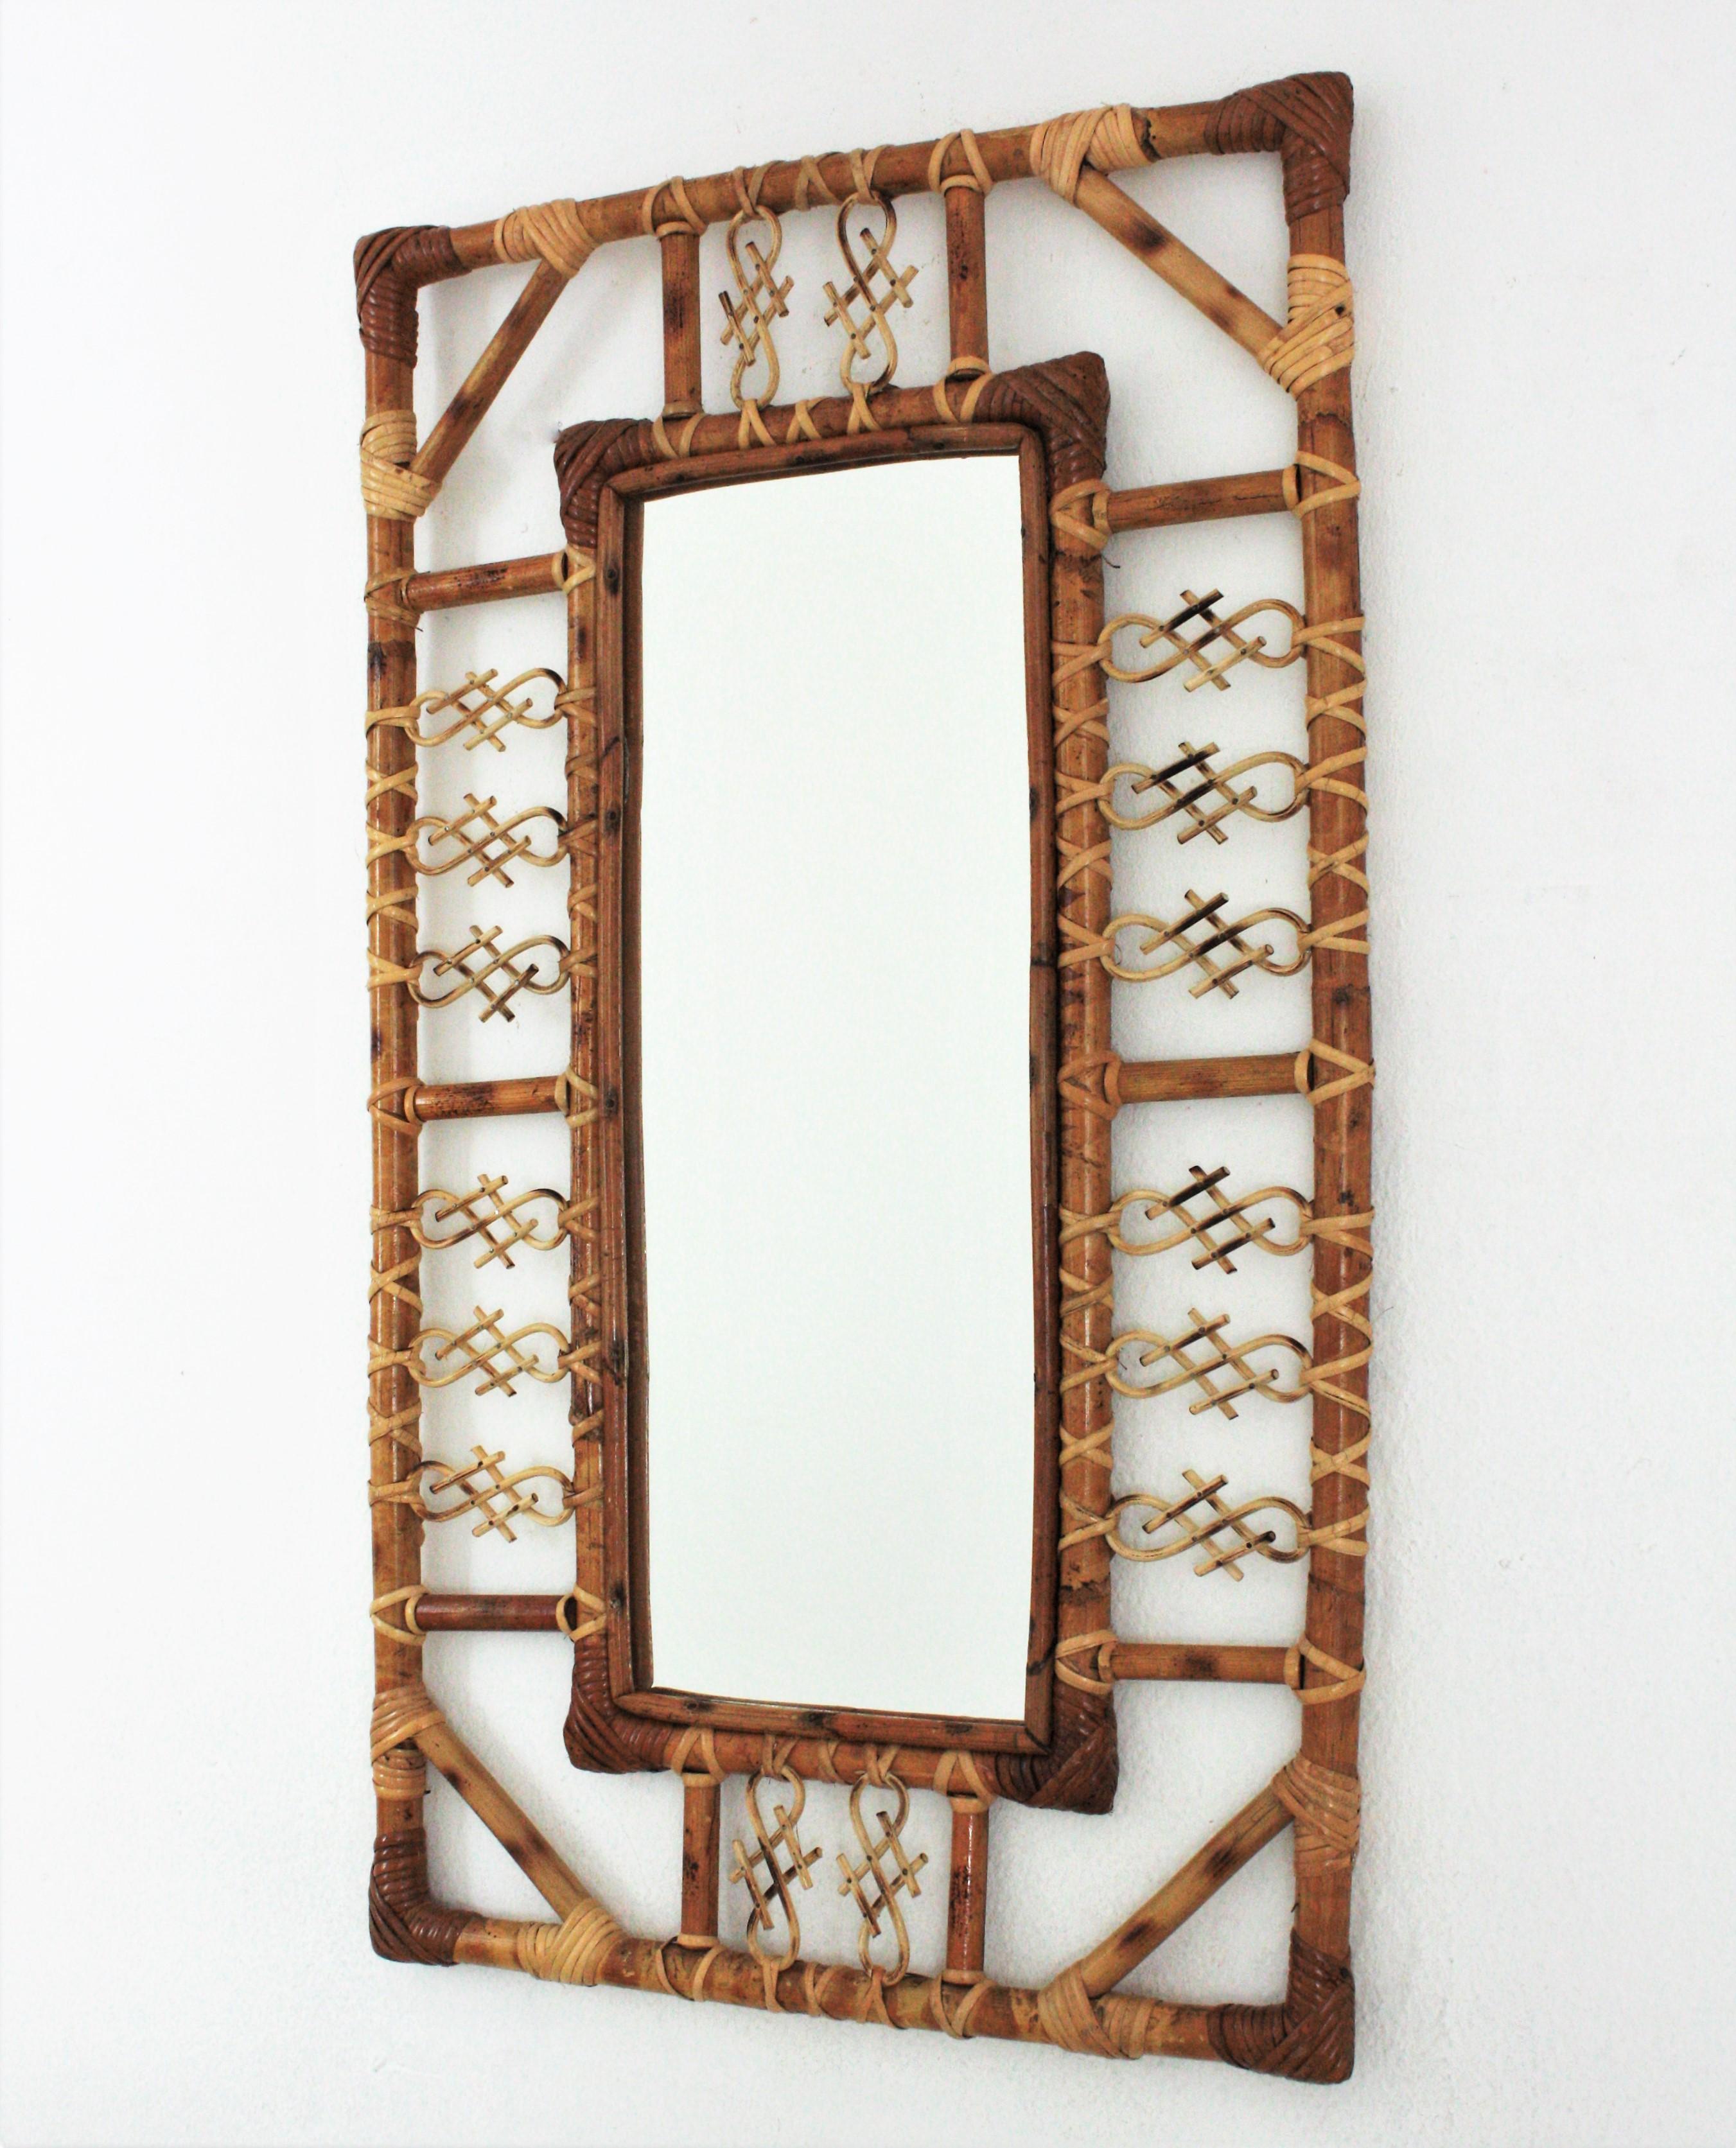 Midcentury rectangular mirror, rattan, bamboo. France, 1960s.
The mirror has chinoiserie and bamboo decorations on the frame and joining the corners. 
It will be eye-catching in an entry hall, bathroom or bedroom and it will add a midcentury